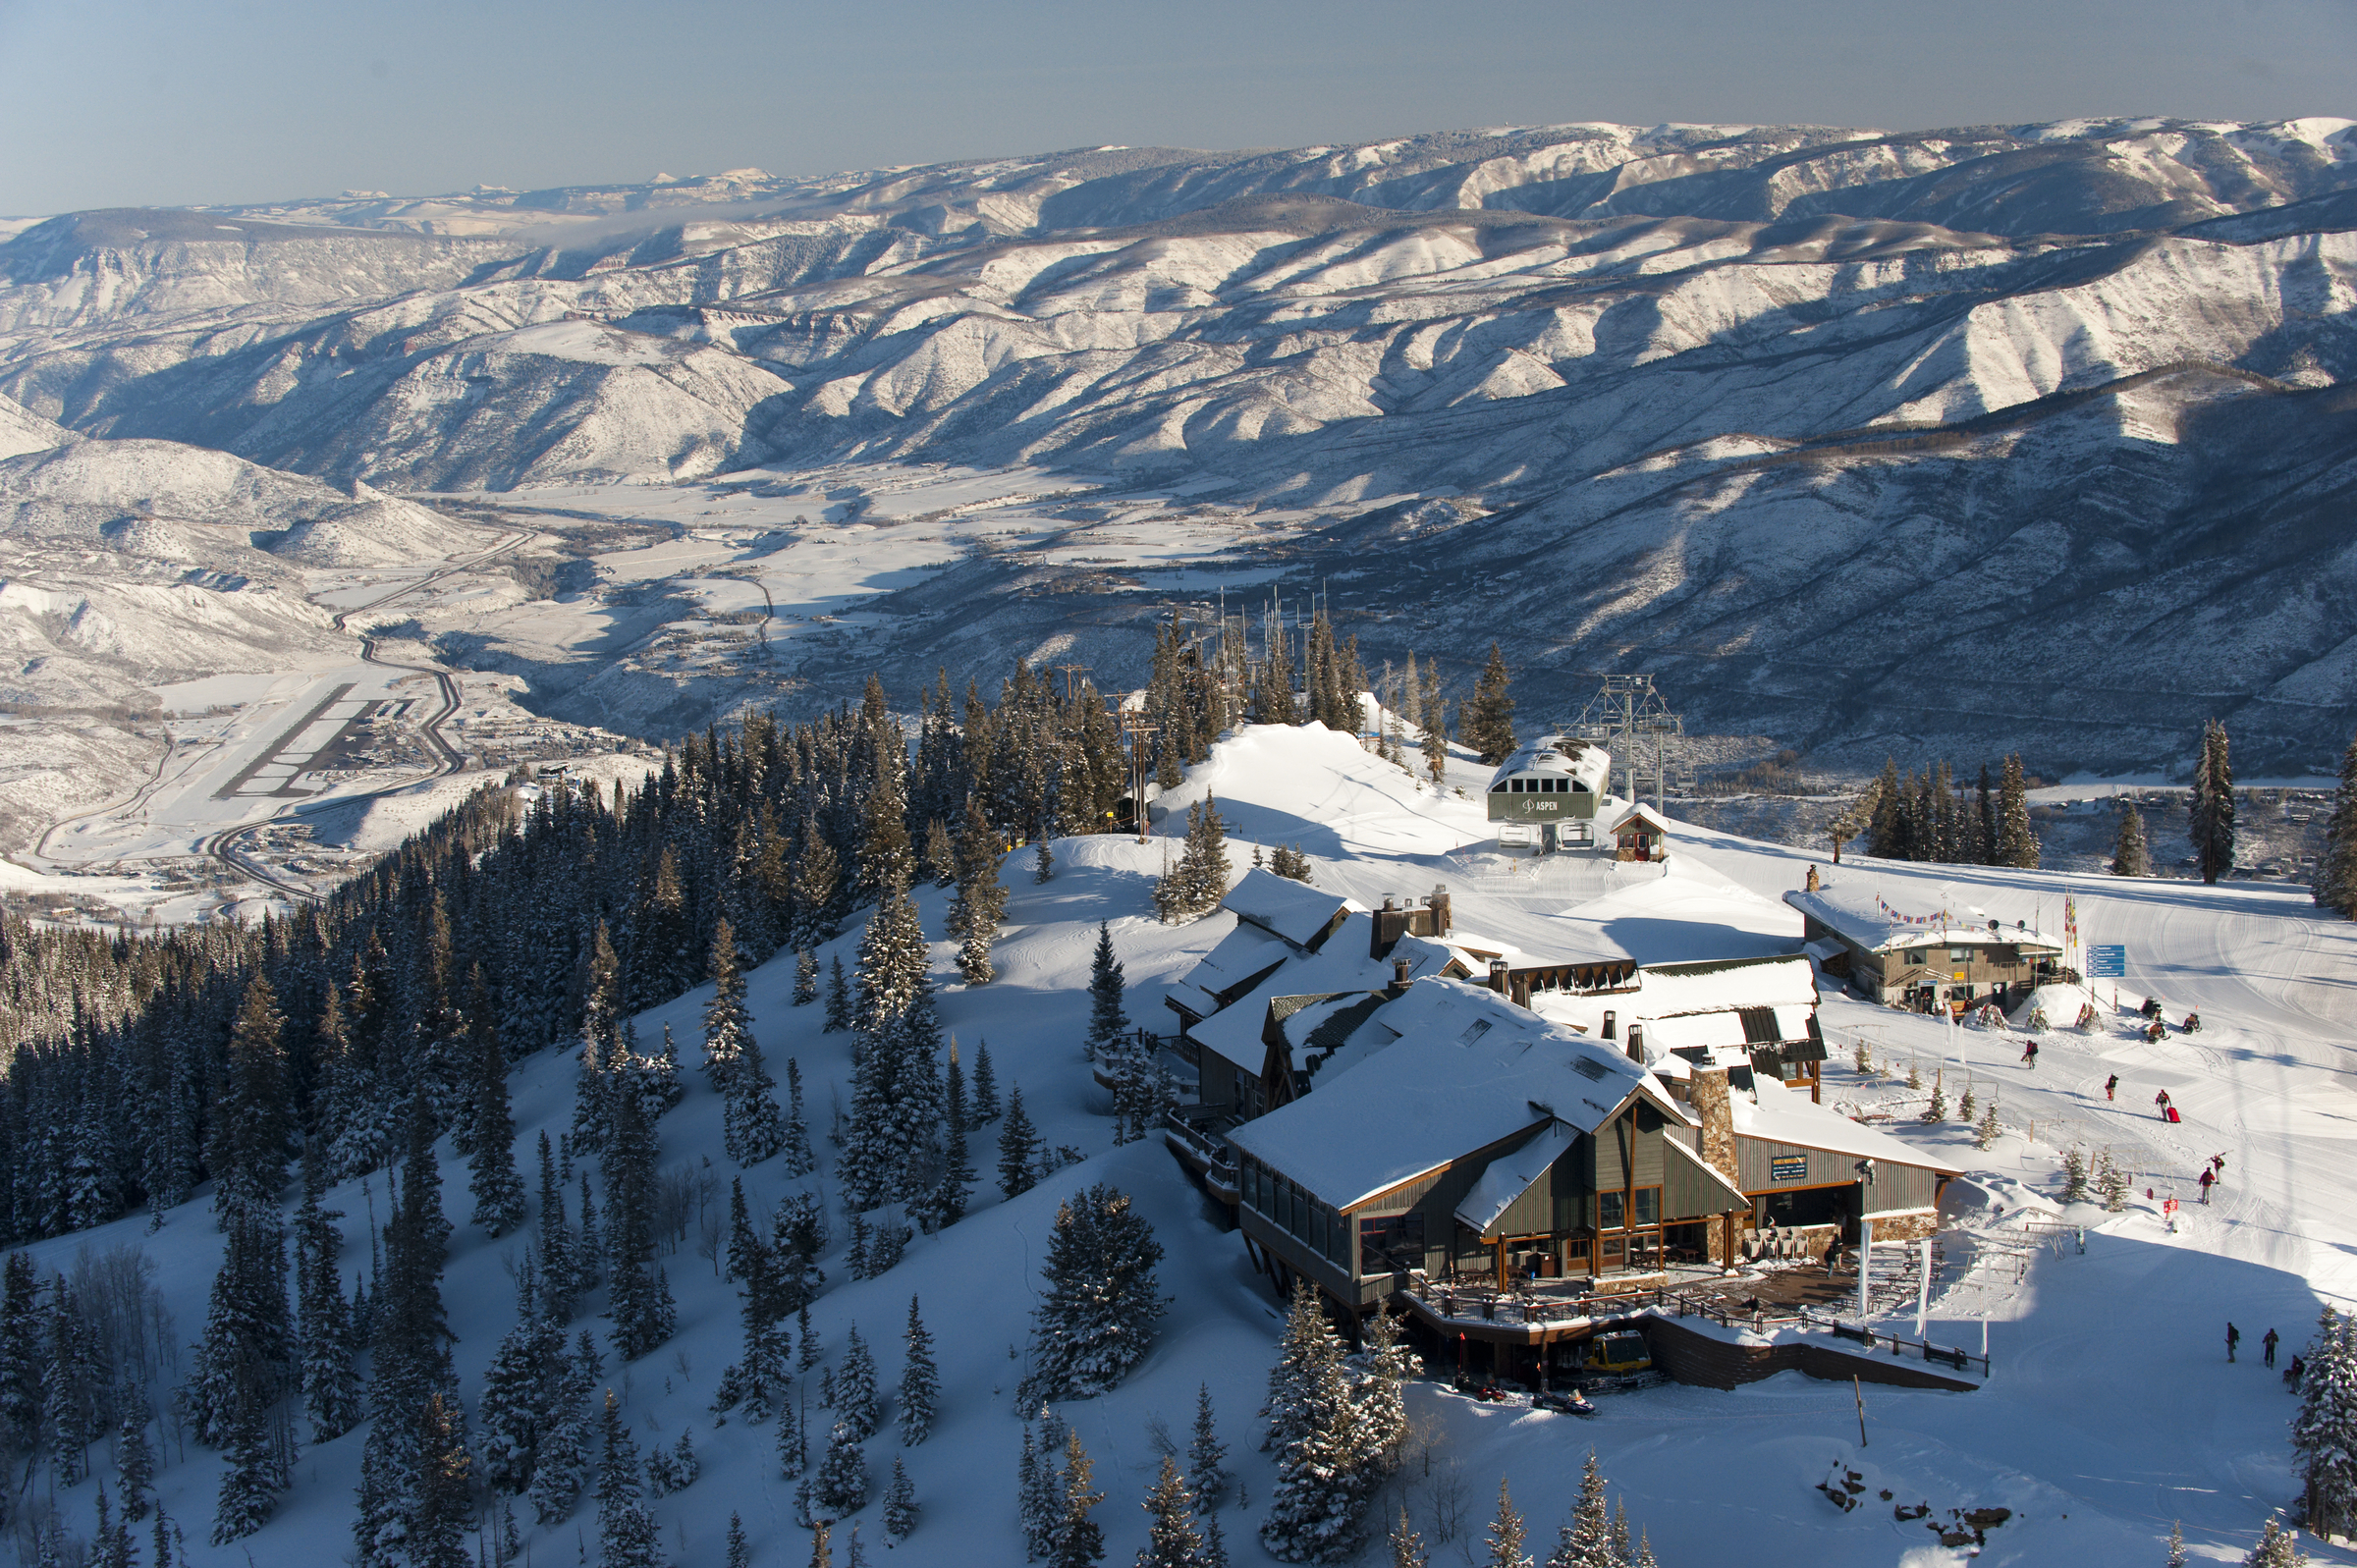 Ariel view of the Sundeck on Aspen Mountain.